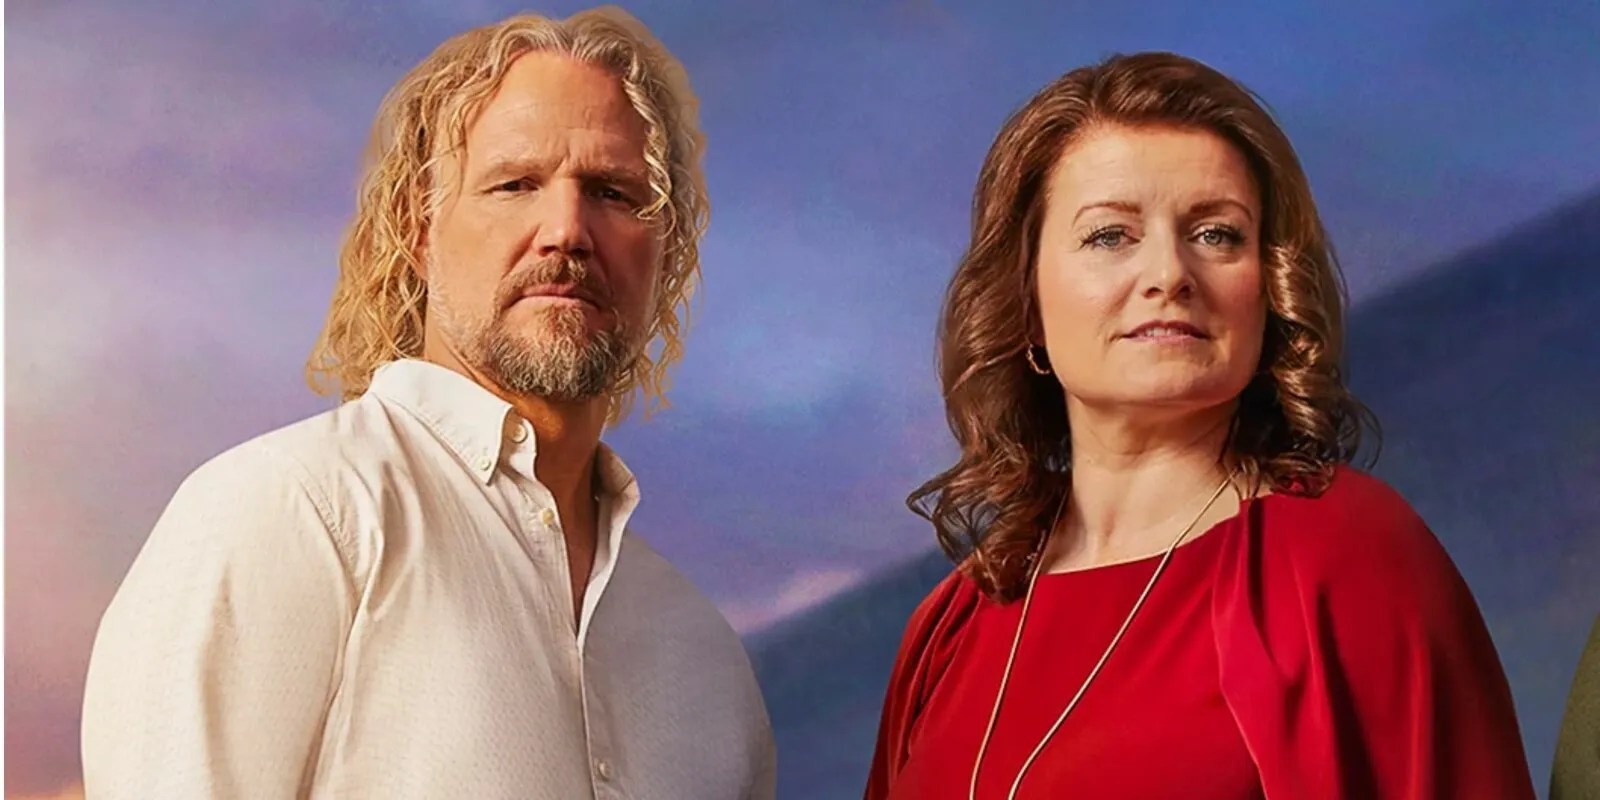 Kody and Robyn Brown photographed during Season 17 of TLC's 'Sister Wives.'